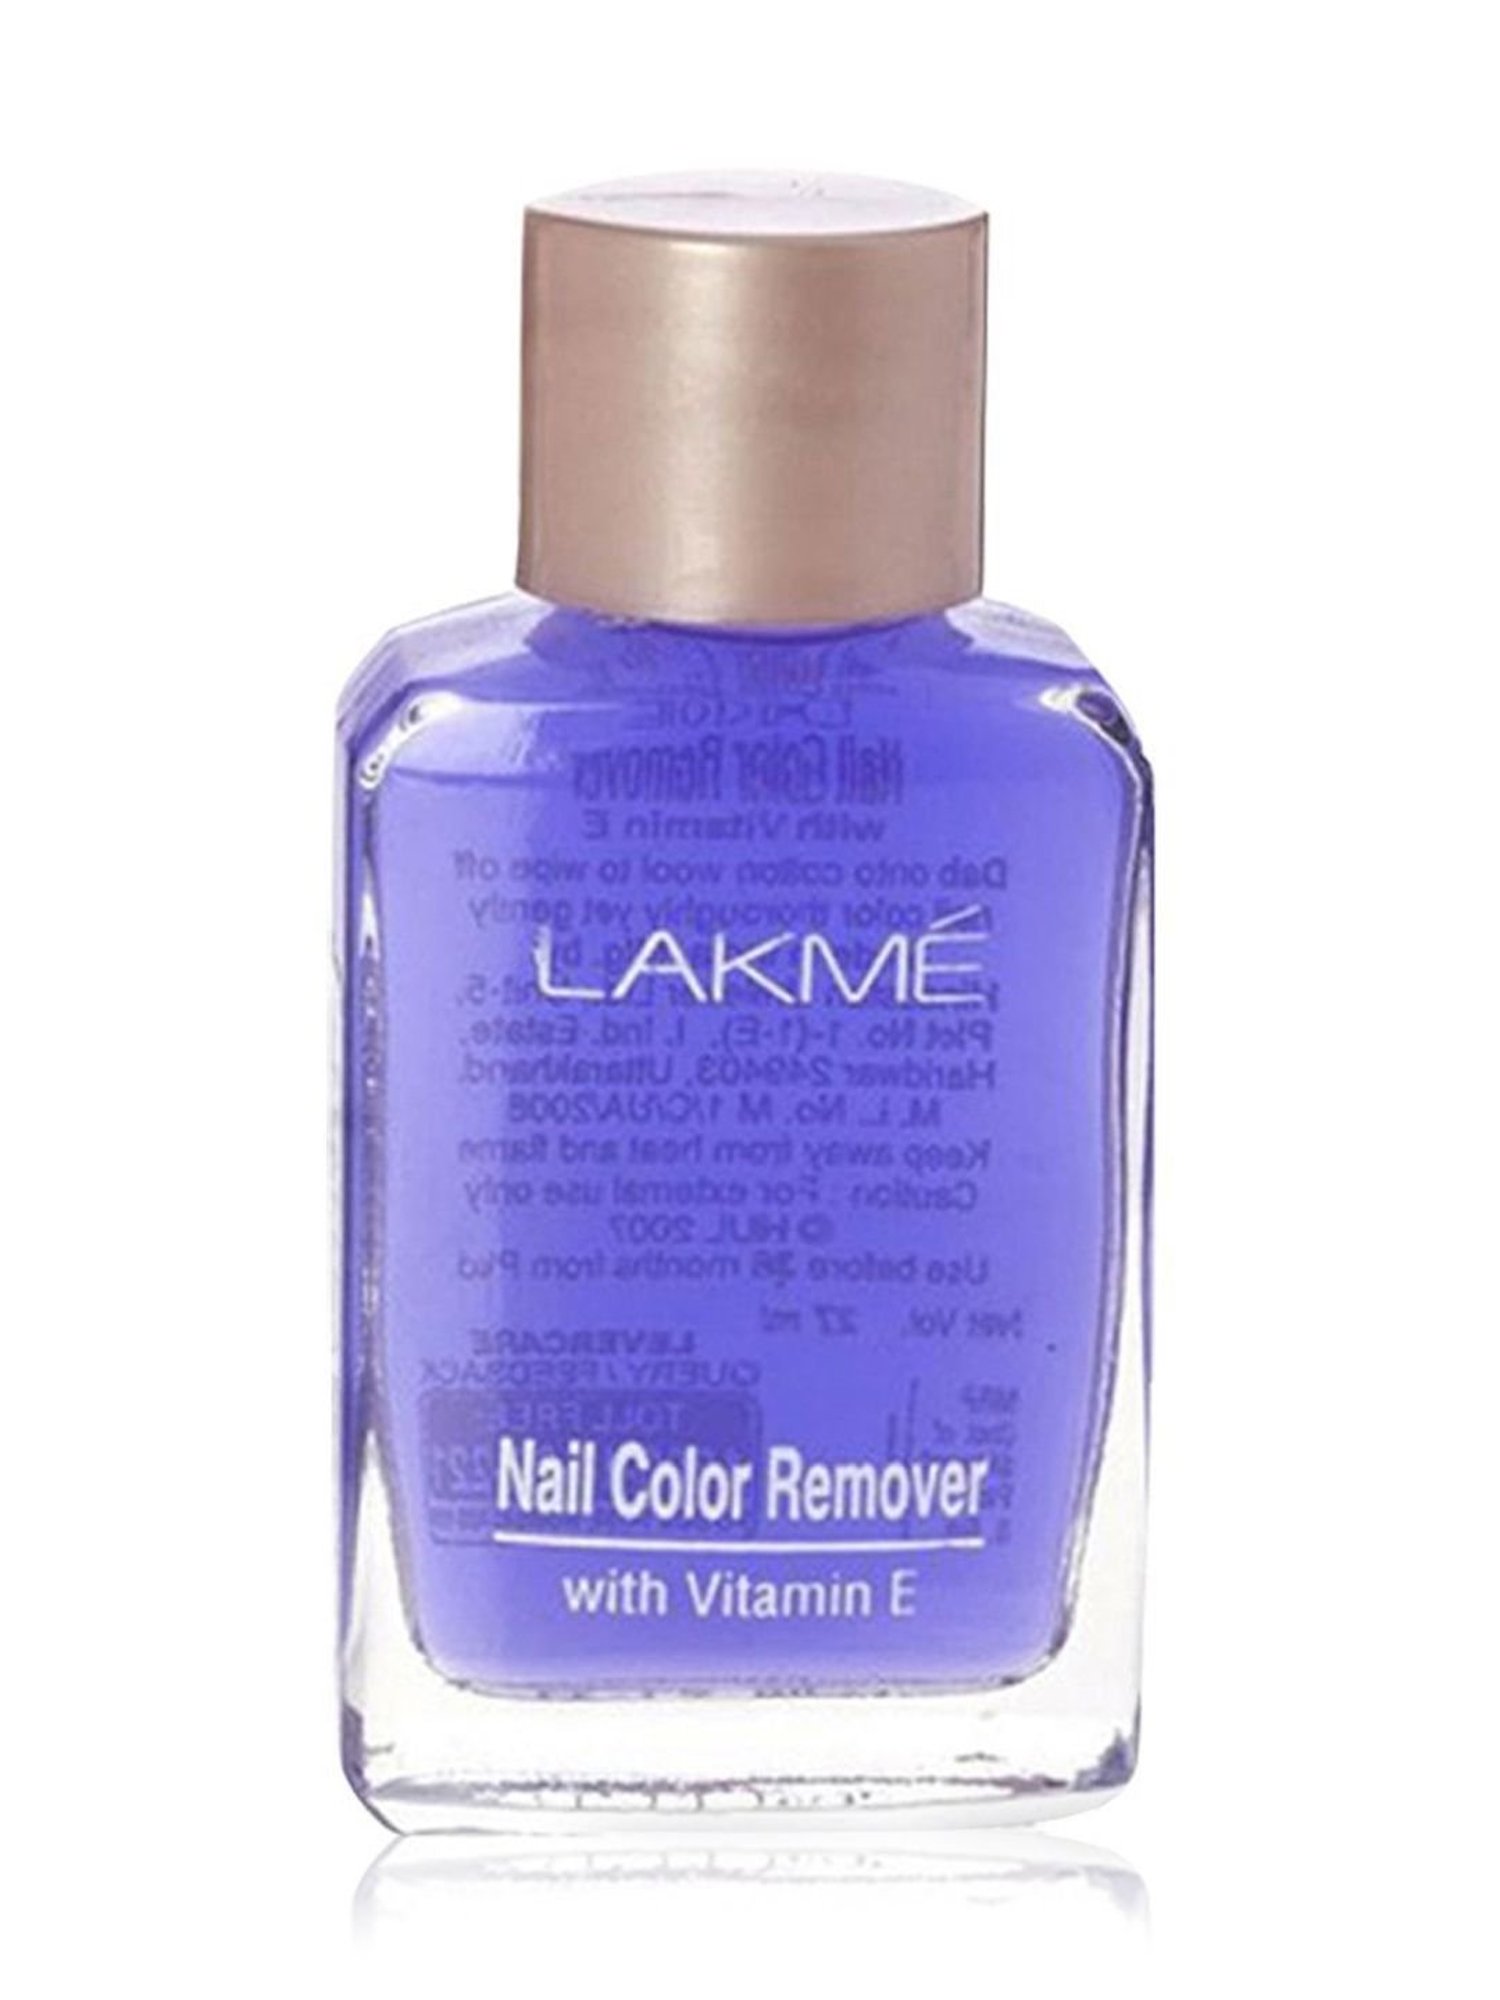 Buy Lakme Nail Color Remover - 27 ml Online At Best Price @ Tata CLiQ